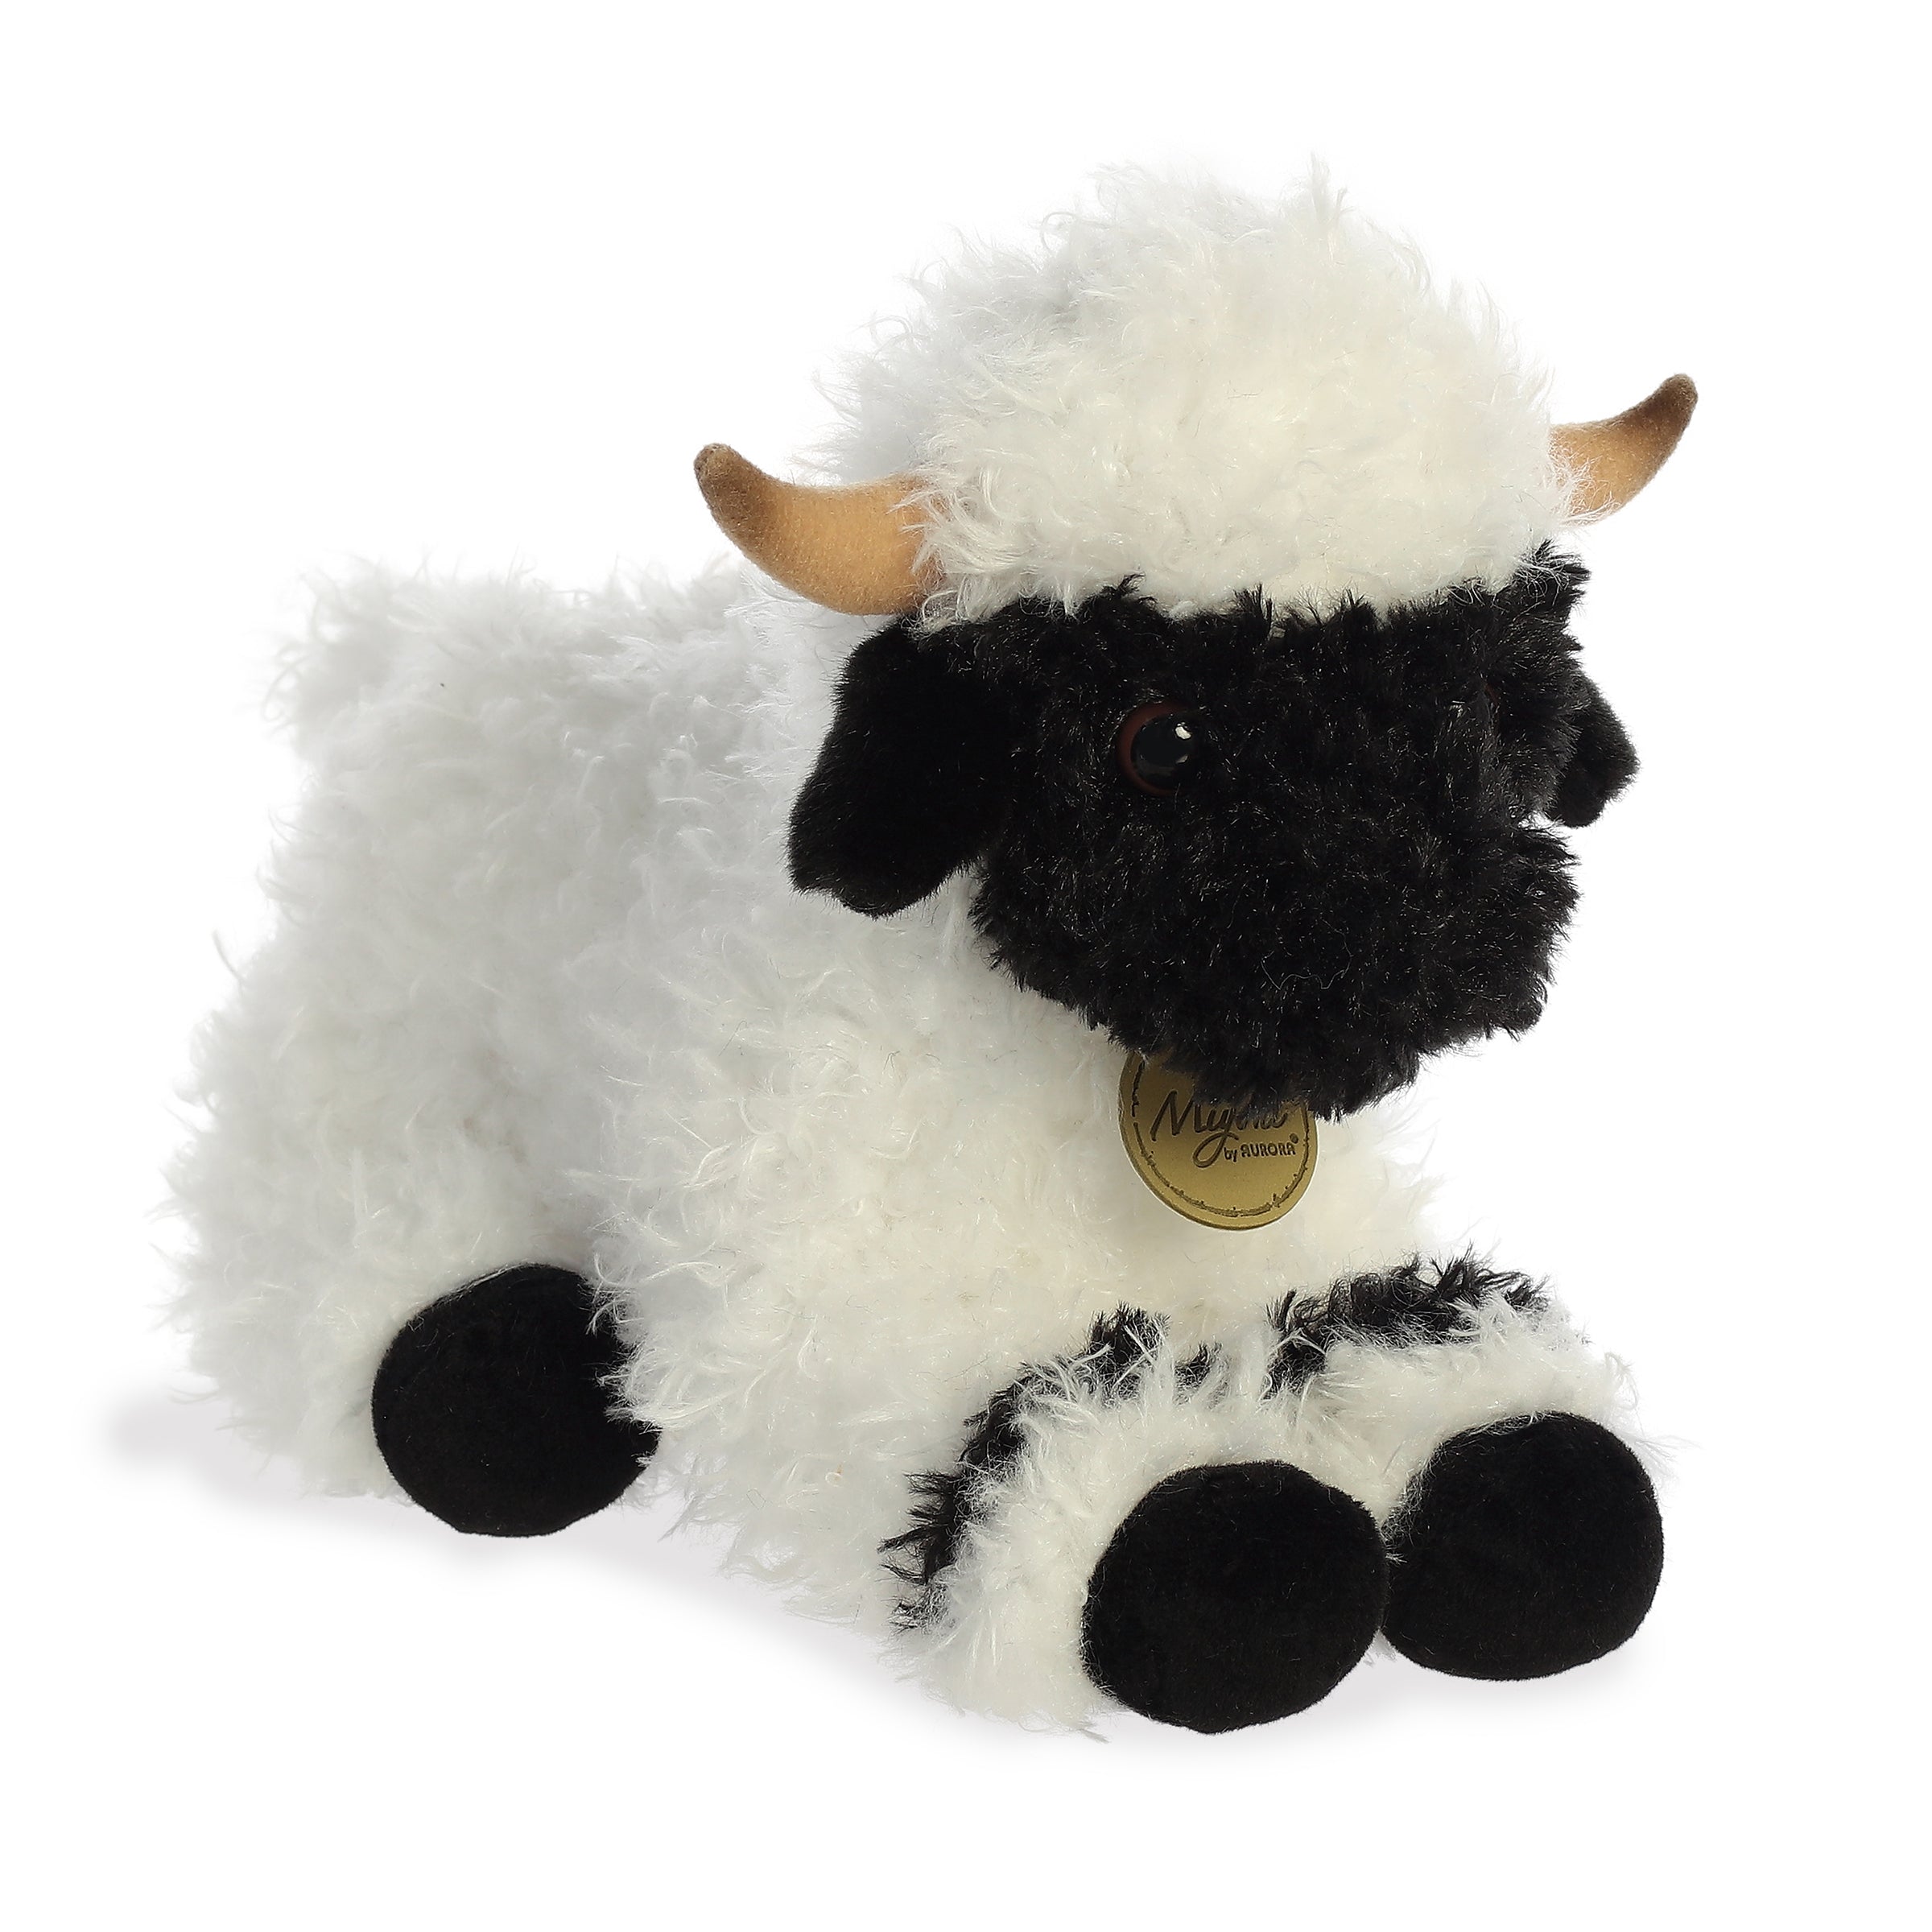 Miyoni Valais Blacknose Sheep plush from Aurora, with fluffy realistic wool and gentle eyes